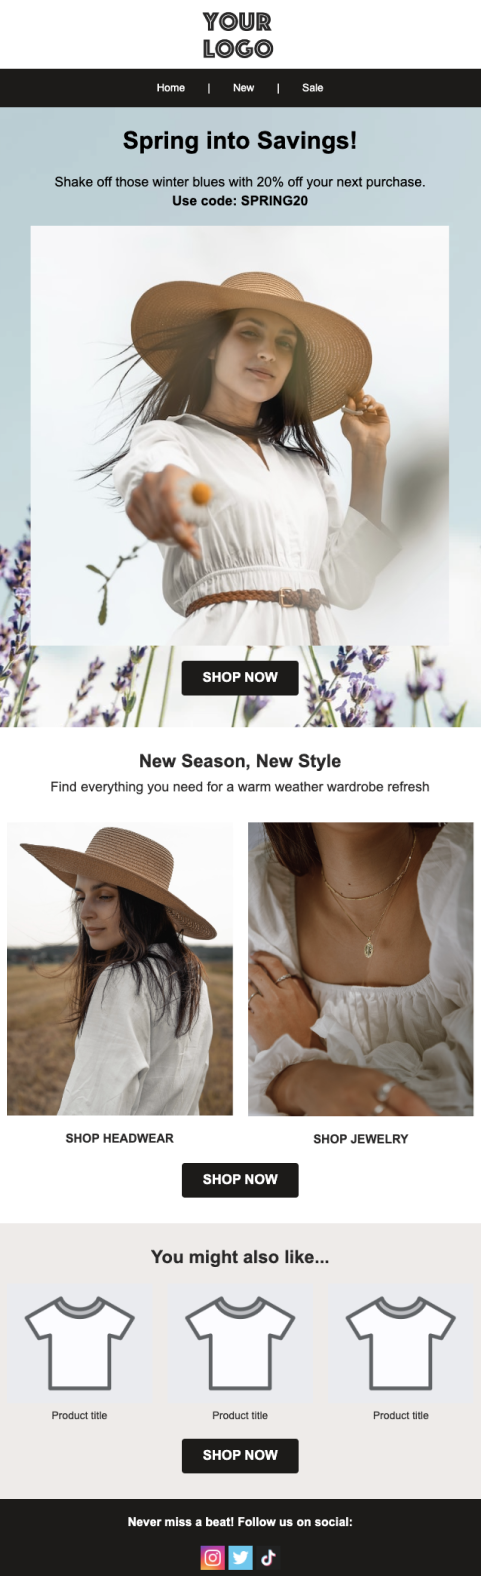 spring email template